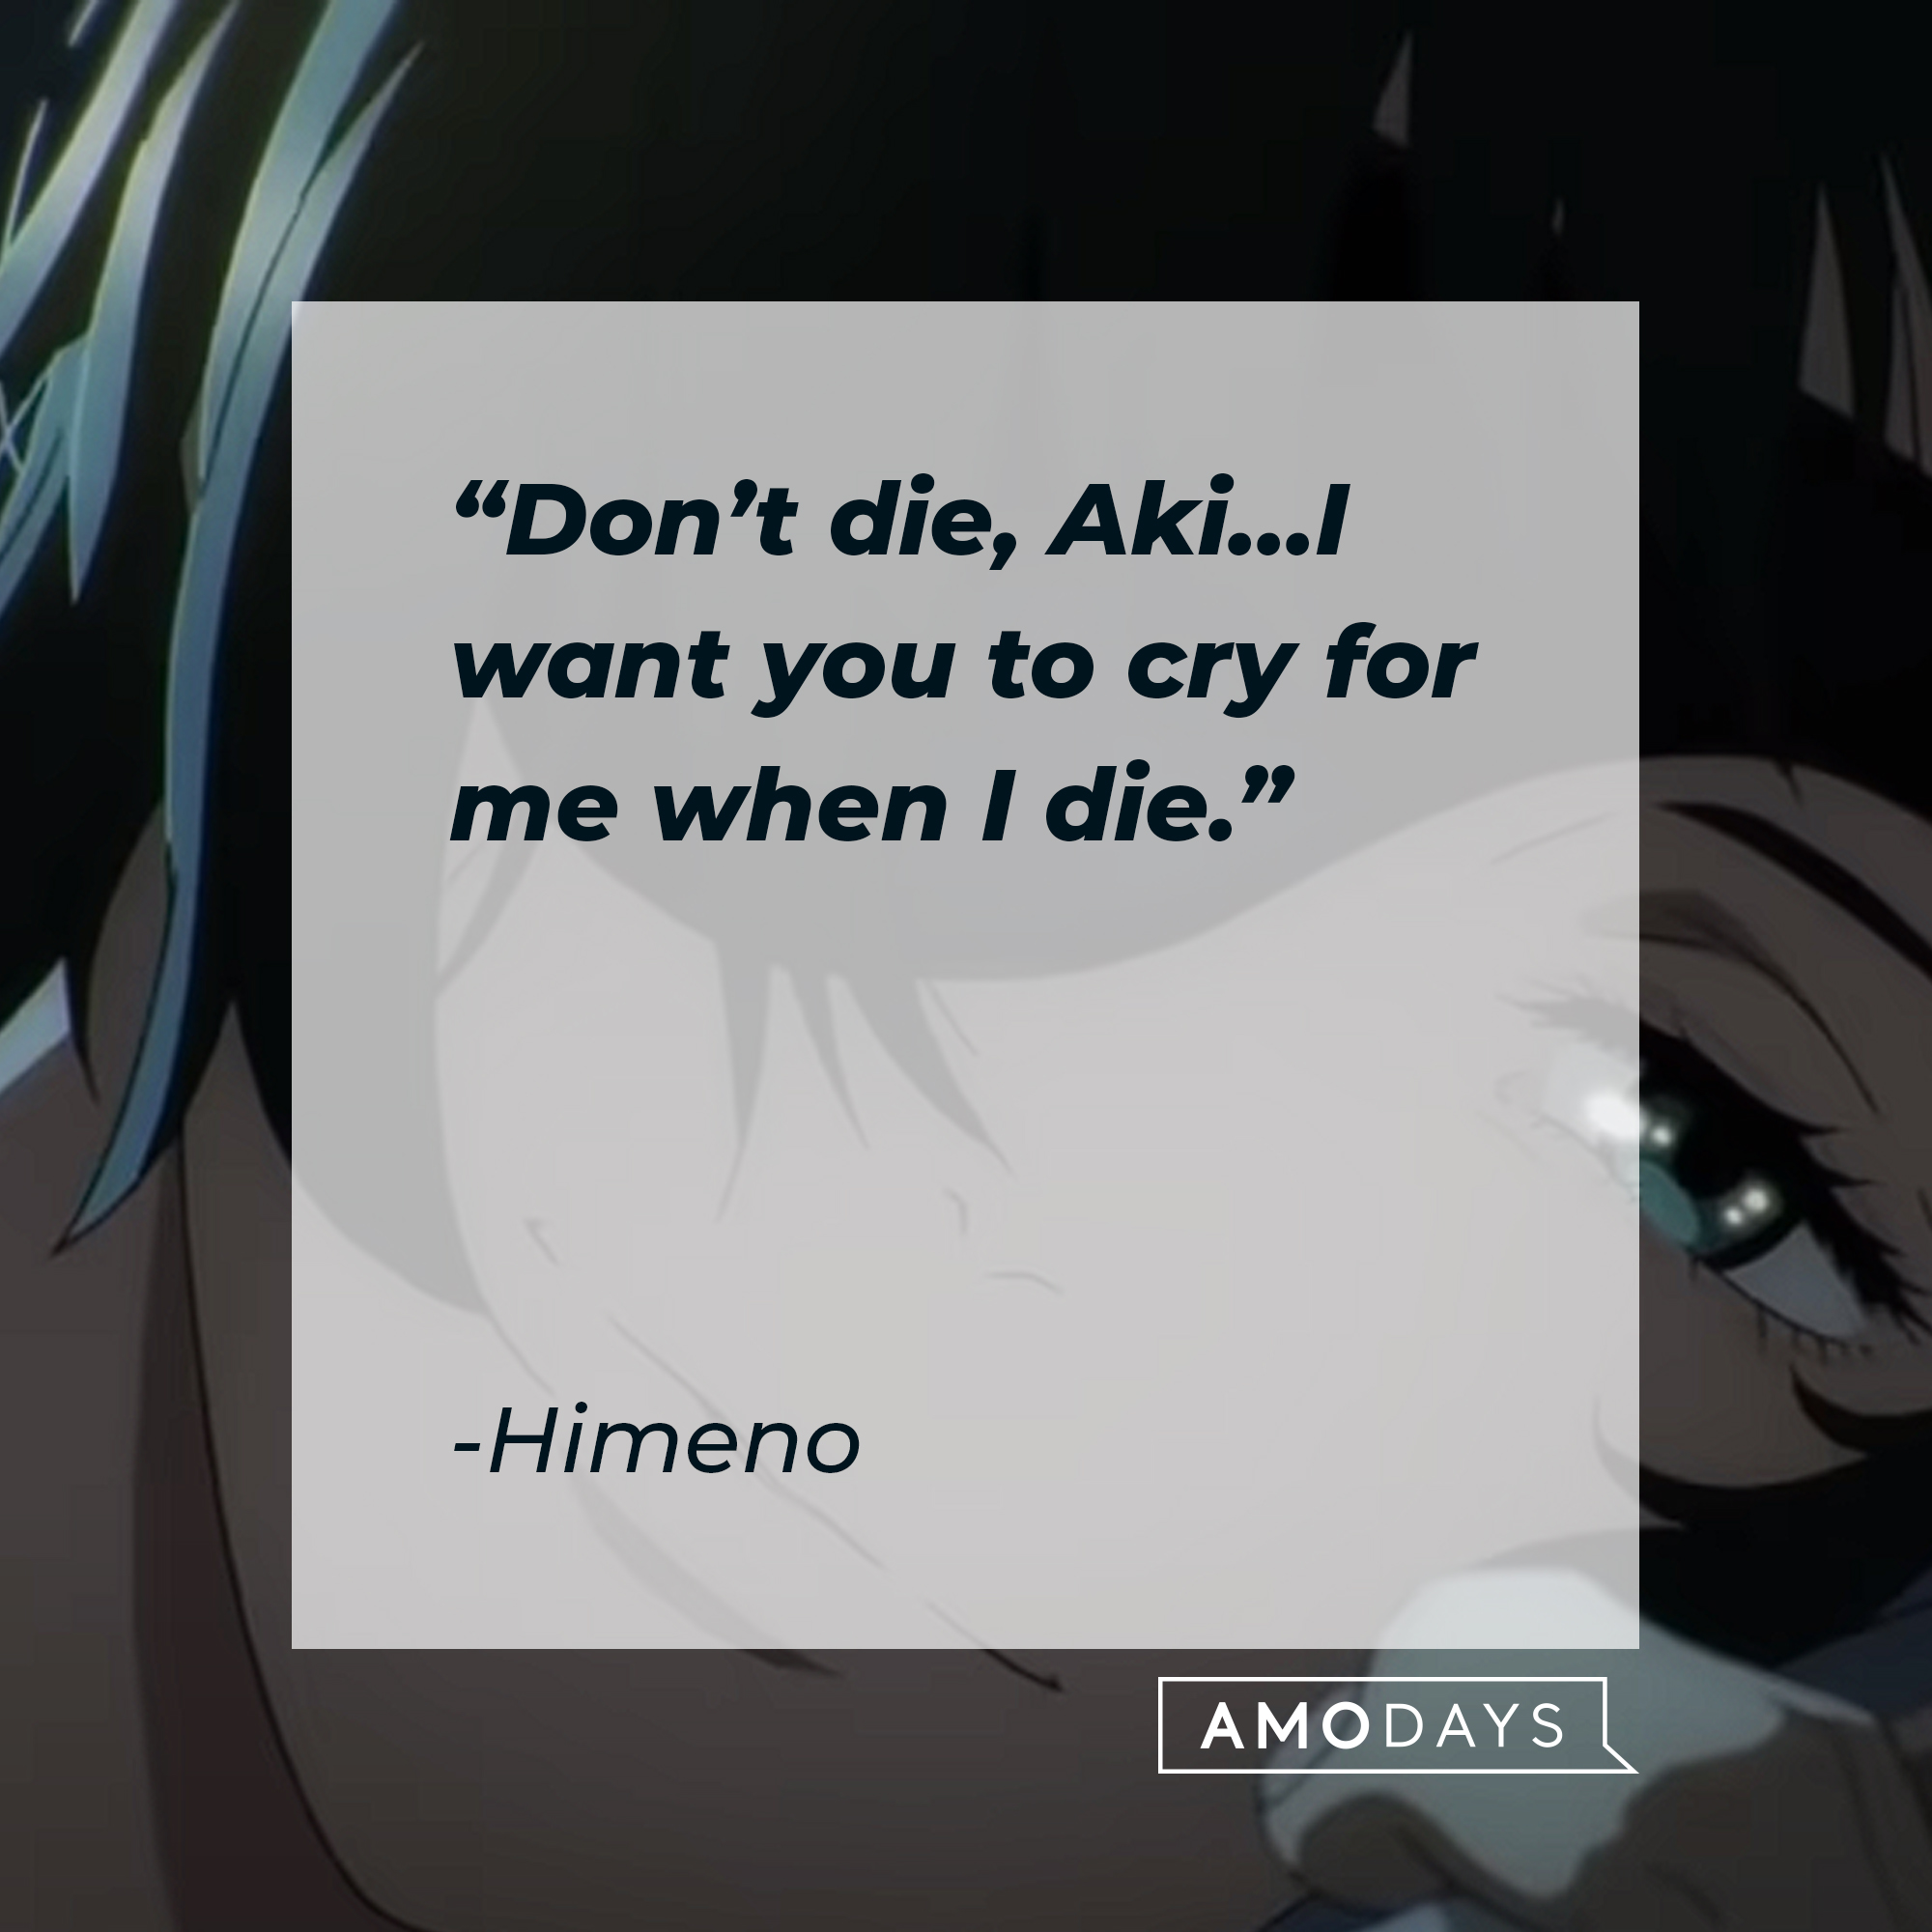 An image of Himeno with his quote: “Don’t die, Aki…I want you to cry for me when I die.” | Source: youtube.com/CrunchyrollCollection